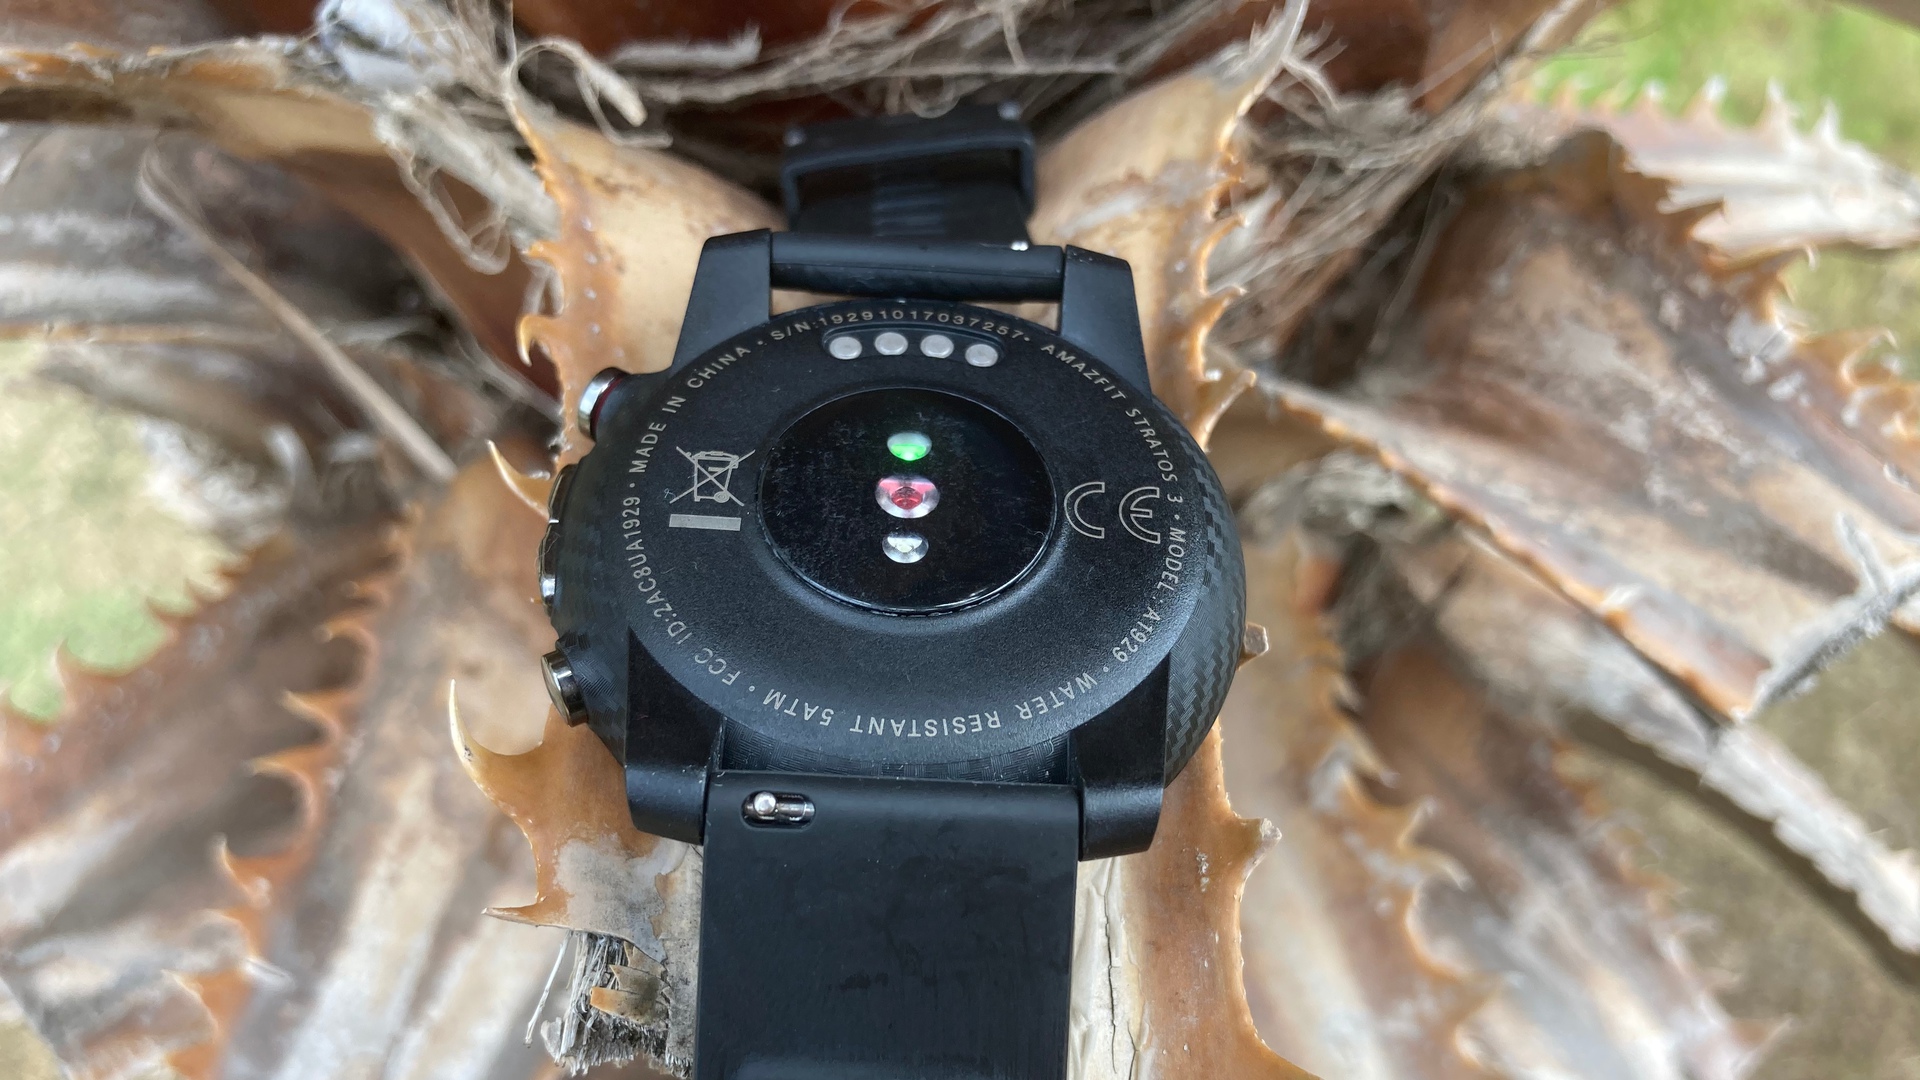 An image showing the backside of the Amazfit Stratos 3 back with heart rate sensor visible